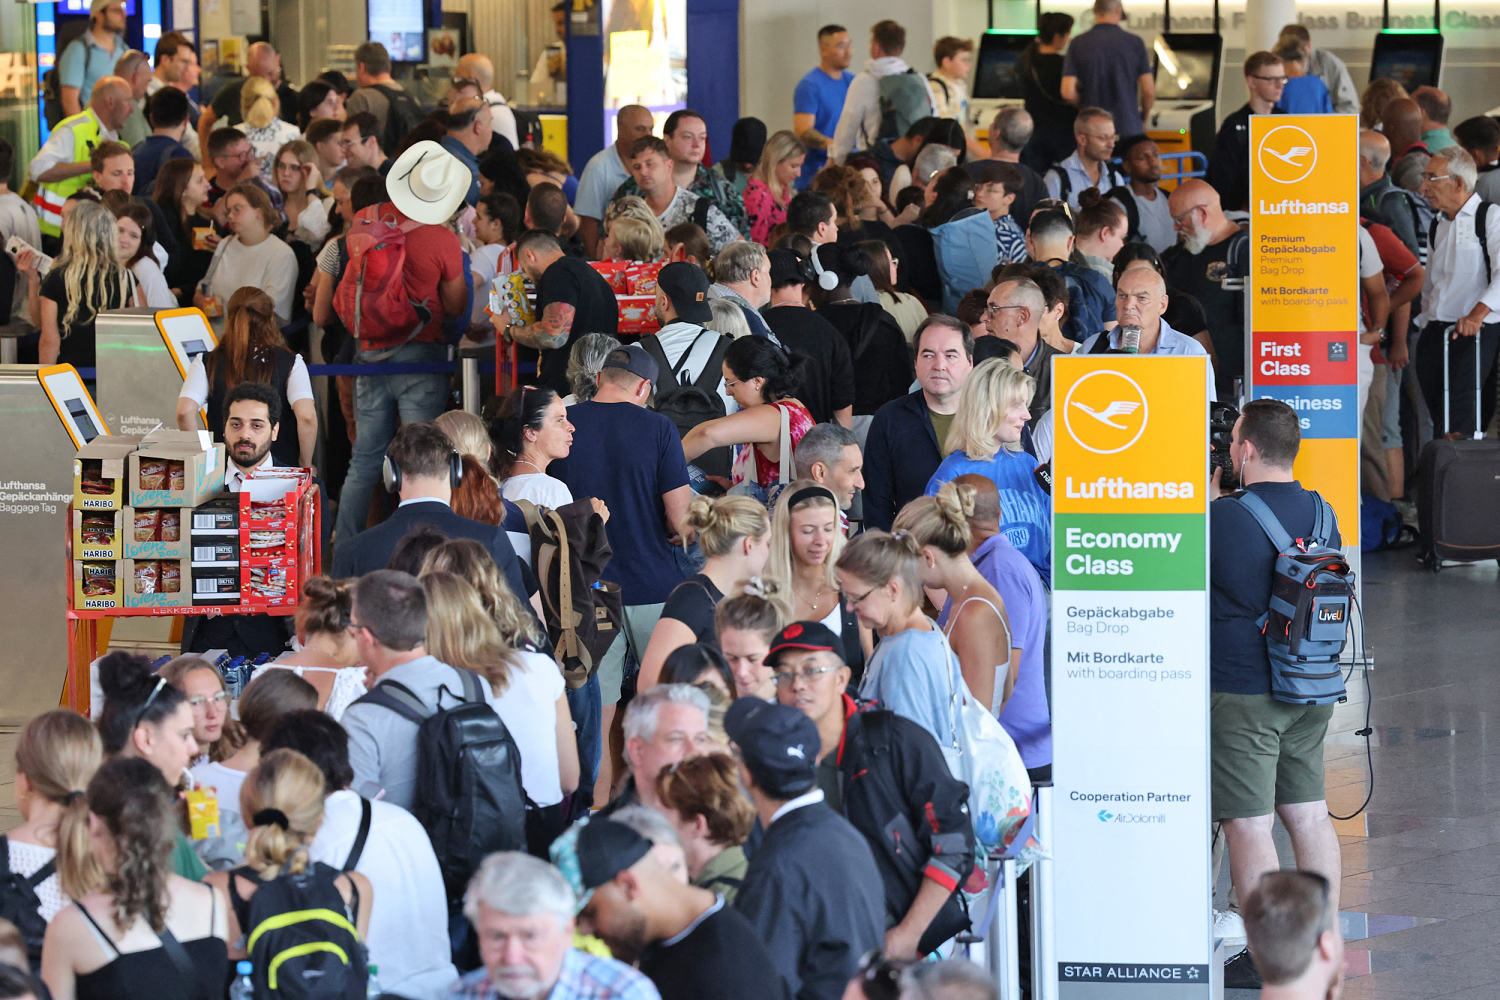 More than 100 flights canceled in Germany as environmental activists target airports